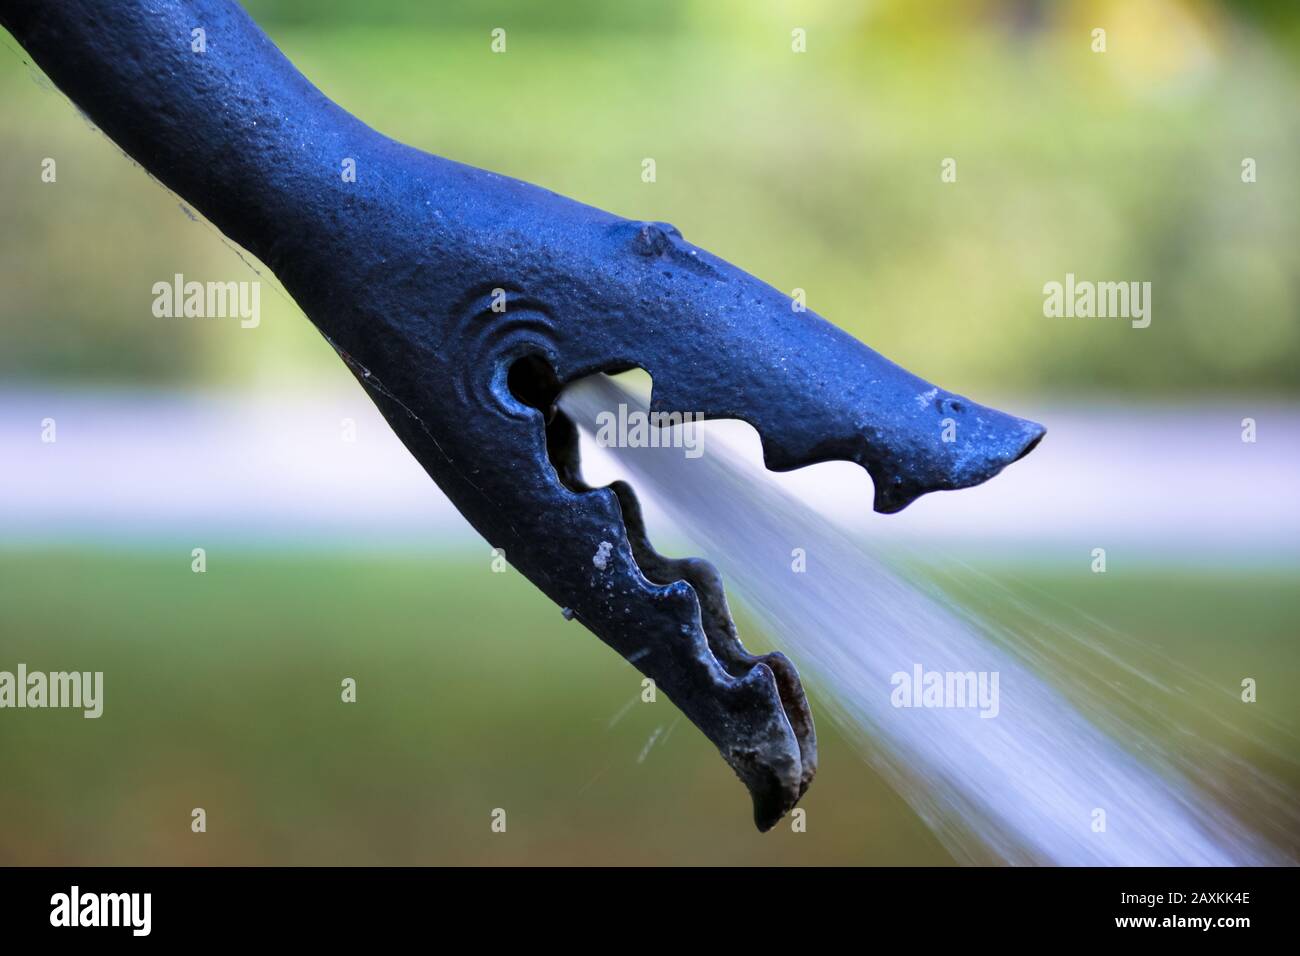 Close-Up Of Water Spraying From Faucet Stock Photo